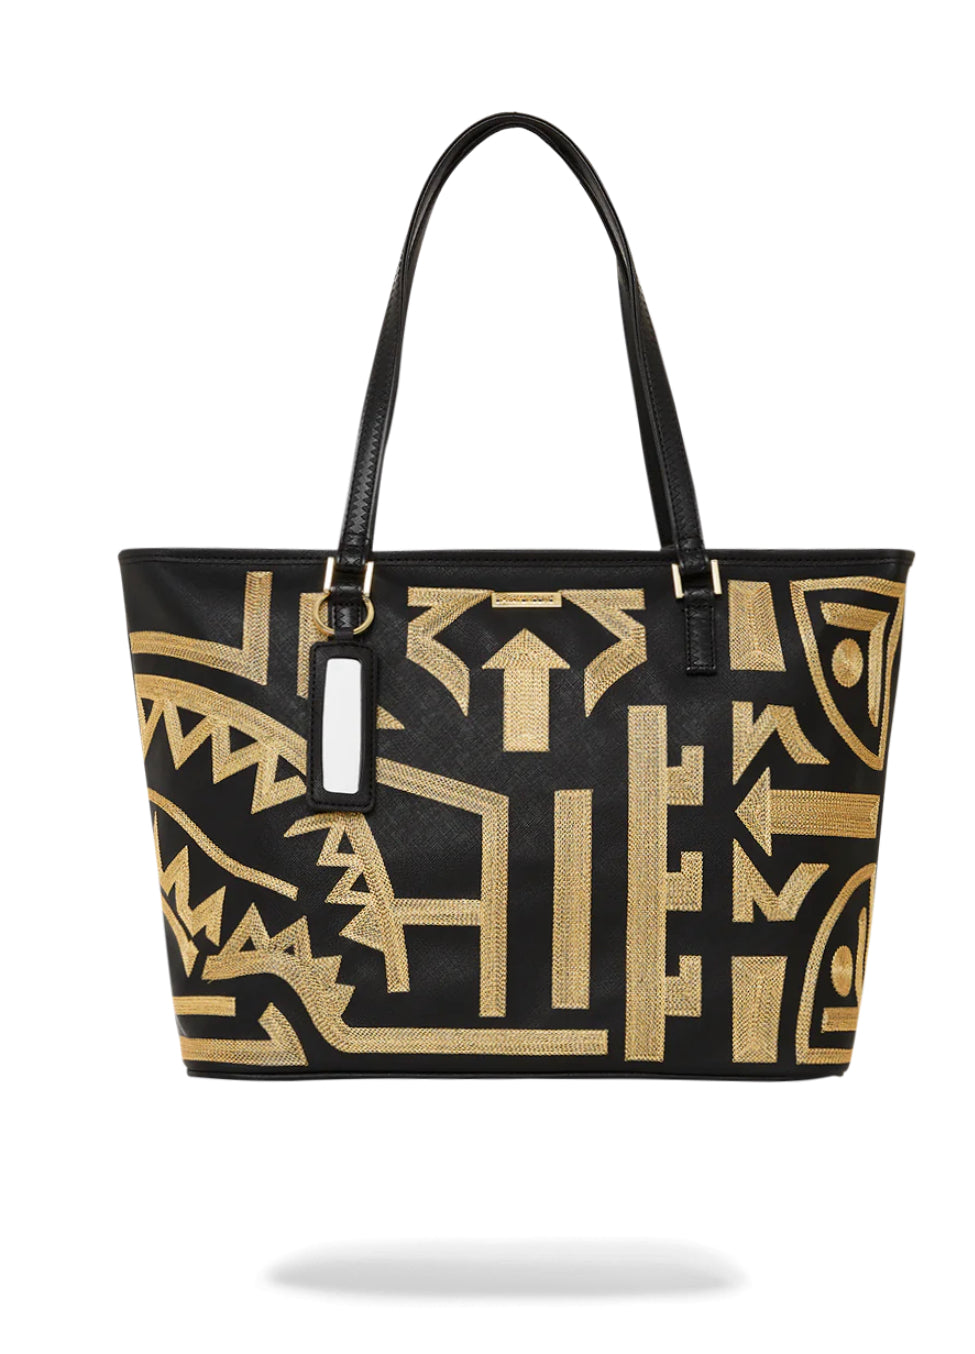 AFRICAN INTELLIGENCE PATH TO THE FUTURE II TOTE